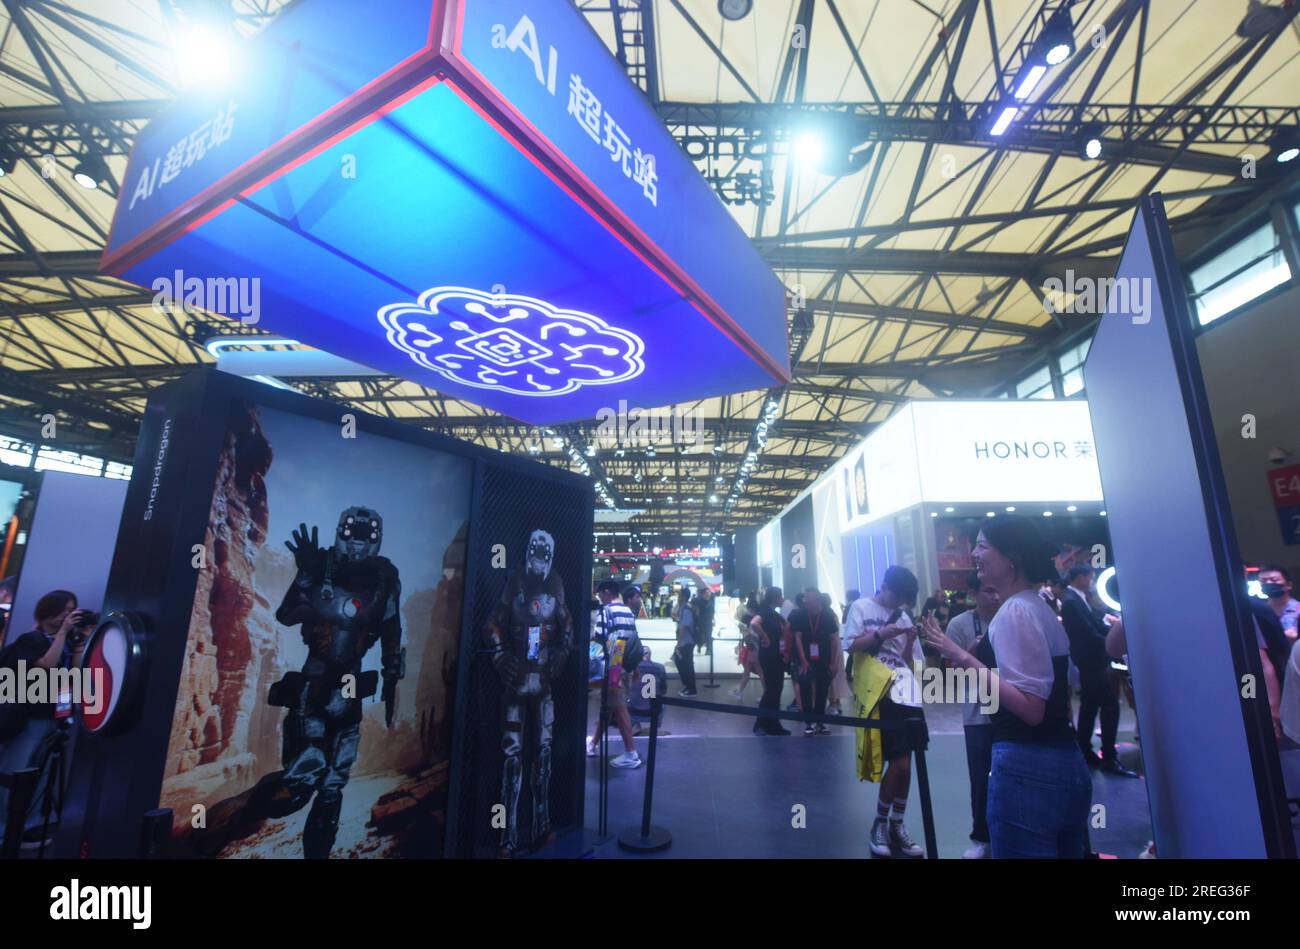 PlayStation's Skipping Gamescom, But It's Showing Up for ChinaJoy 2023